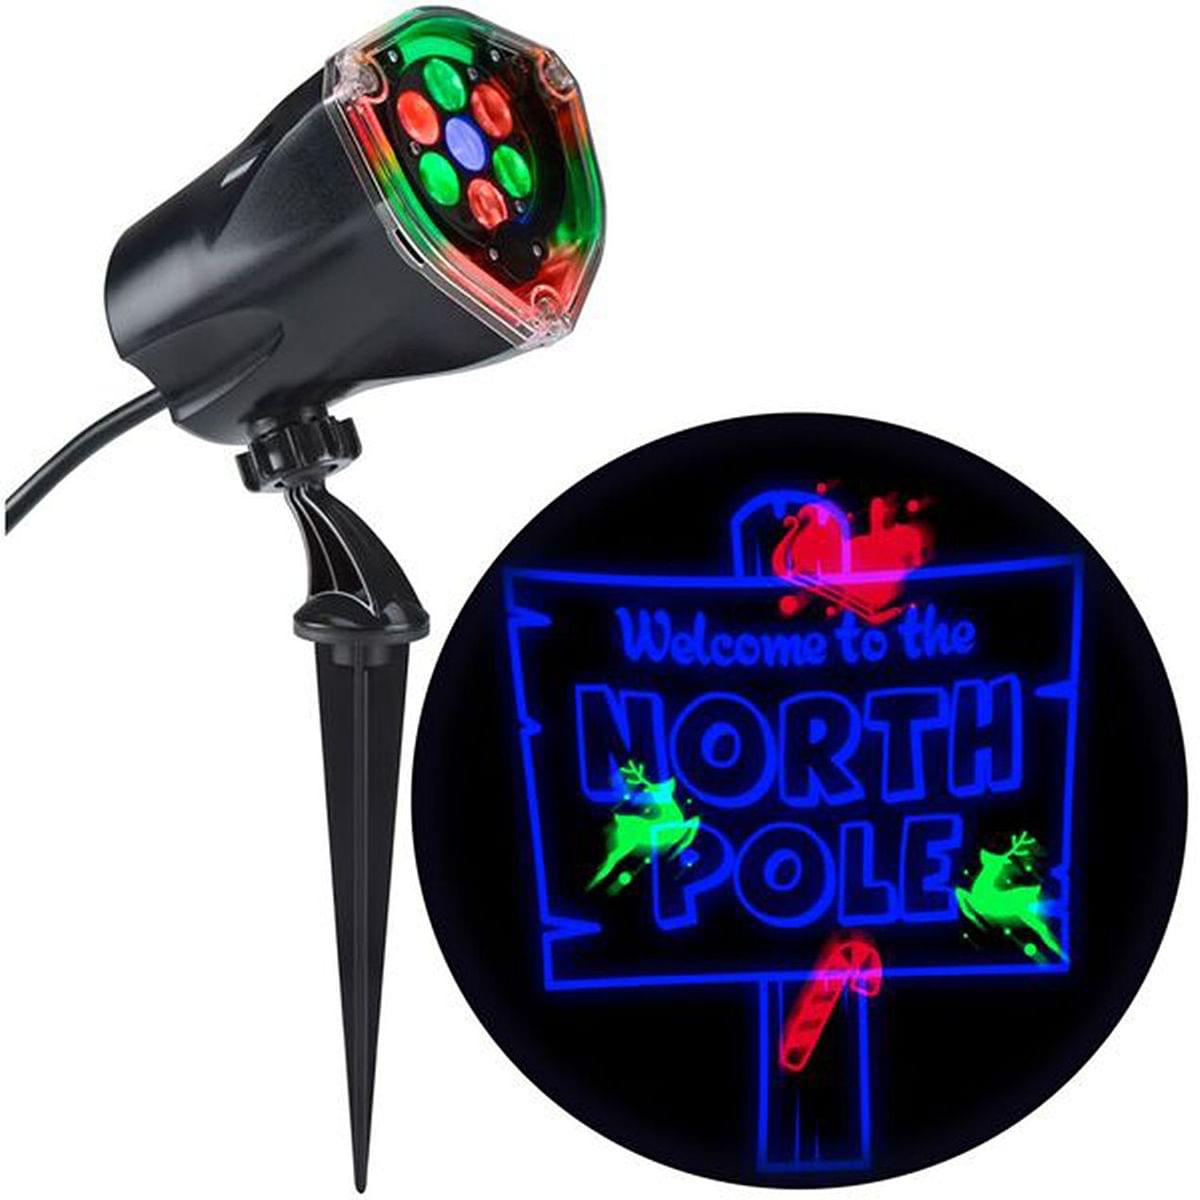 Holiday Lightshow Projection: Whirl-a-Motion+ North Pole (RGB/Blue)